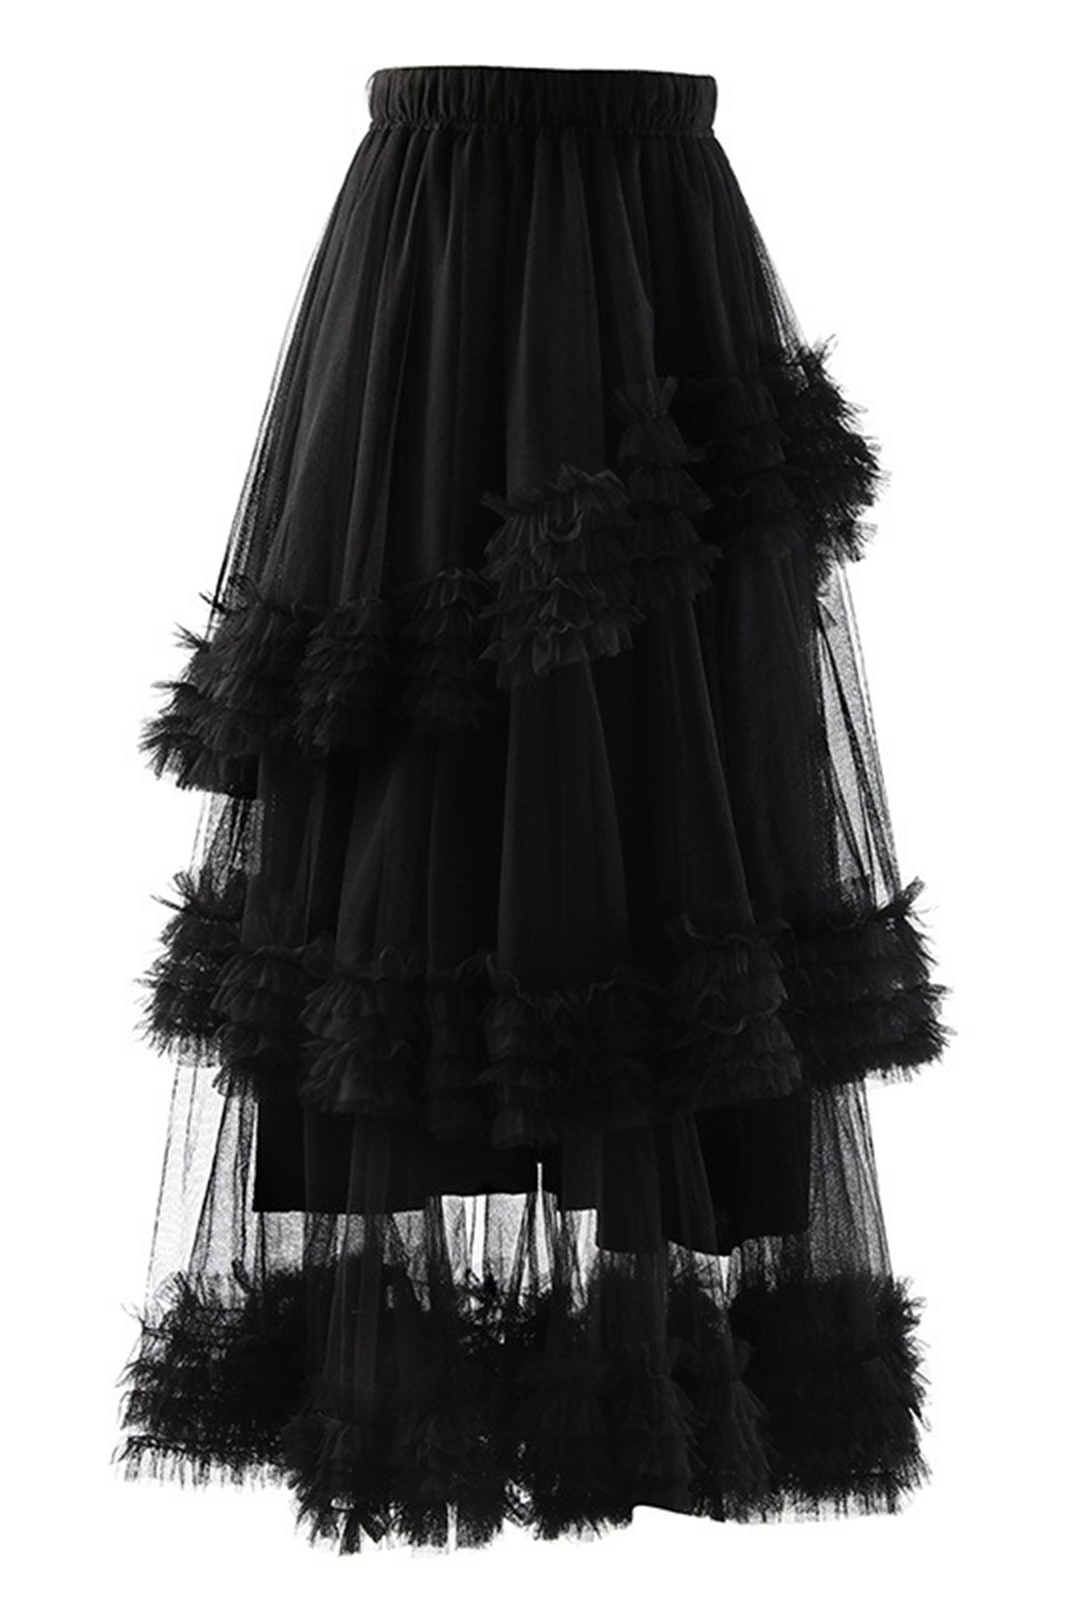 Black Tiered Tulle Long Skirt Perth | Hurly-Burly